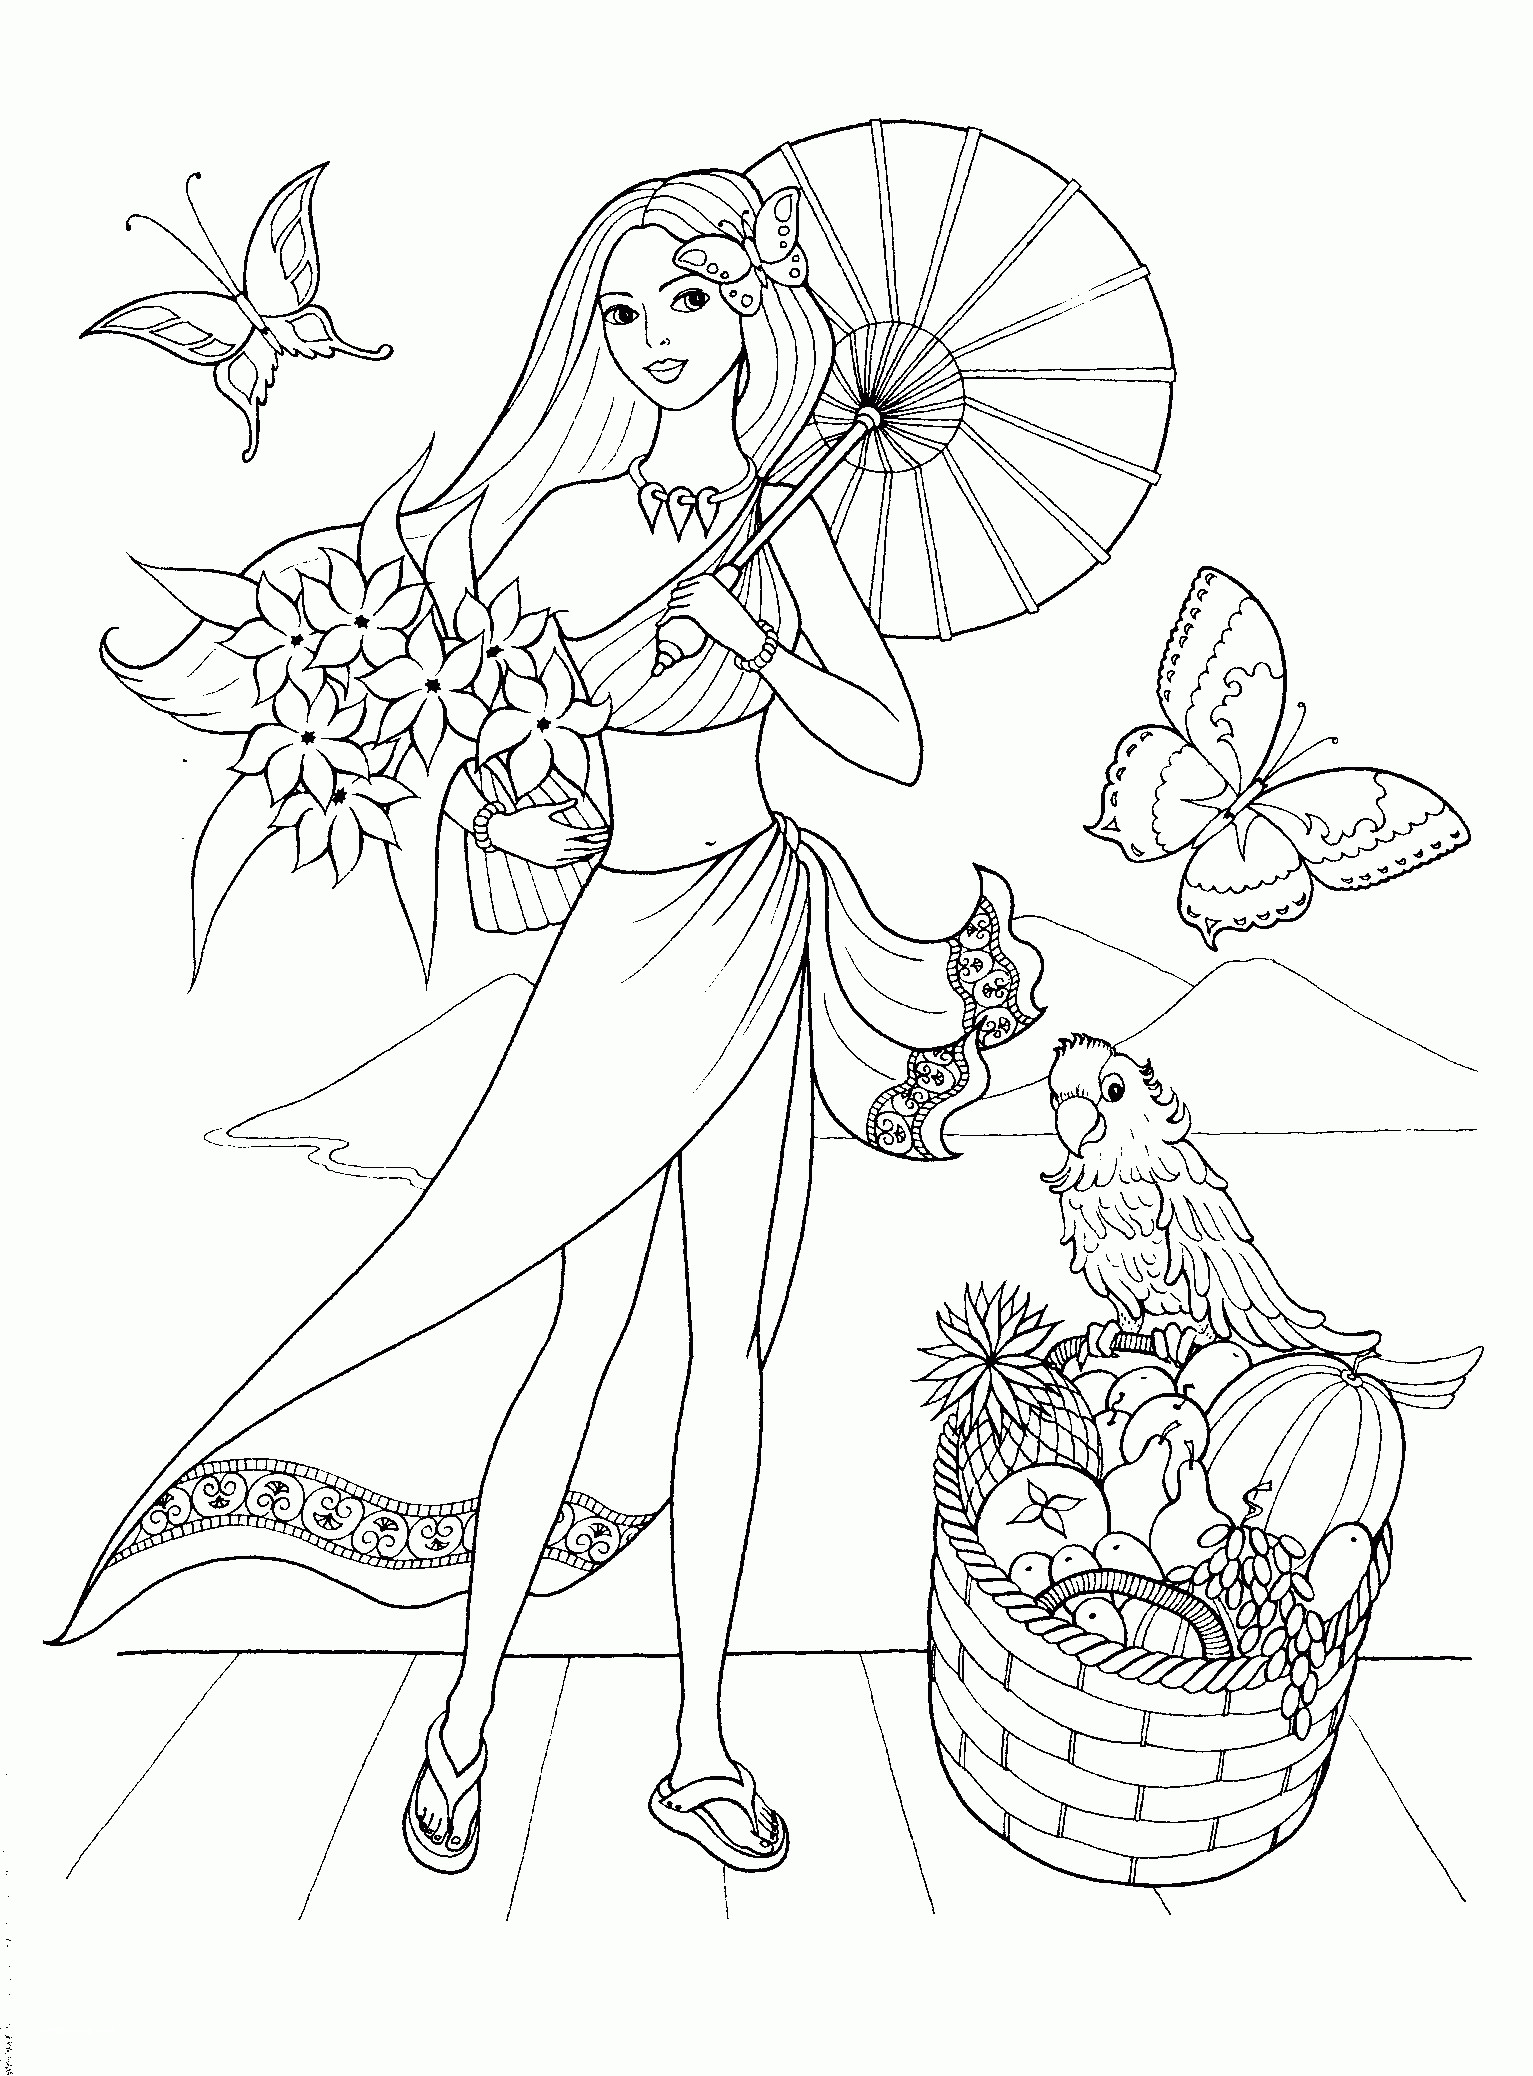 coloring pages : Coloring Pages For Teenage Girl Beautiful Free Fashion Coloring  Pages For Girls Printable Download Coloring Pages for Teenage Girl ~  affiliateprogrambook.com